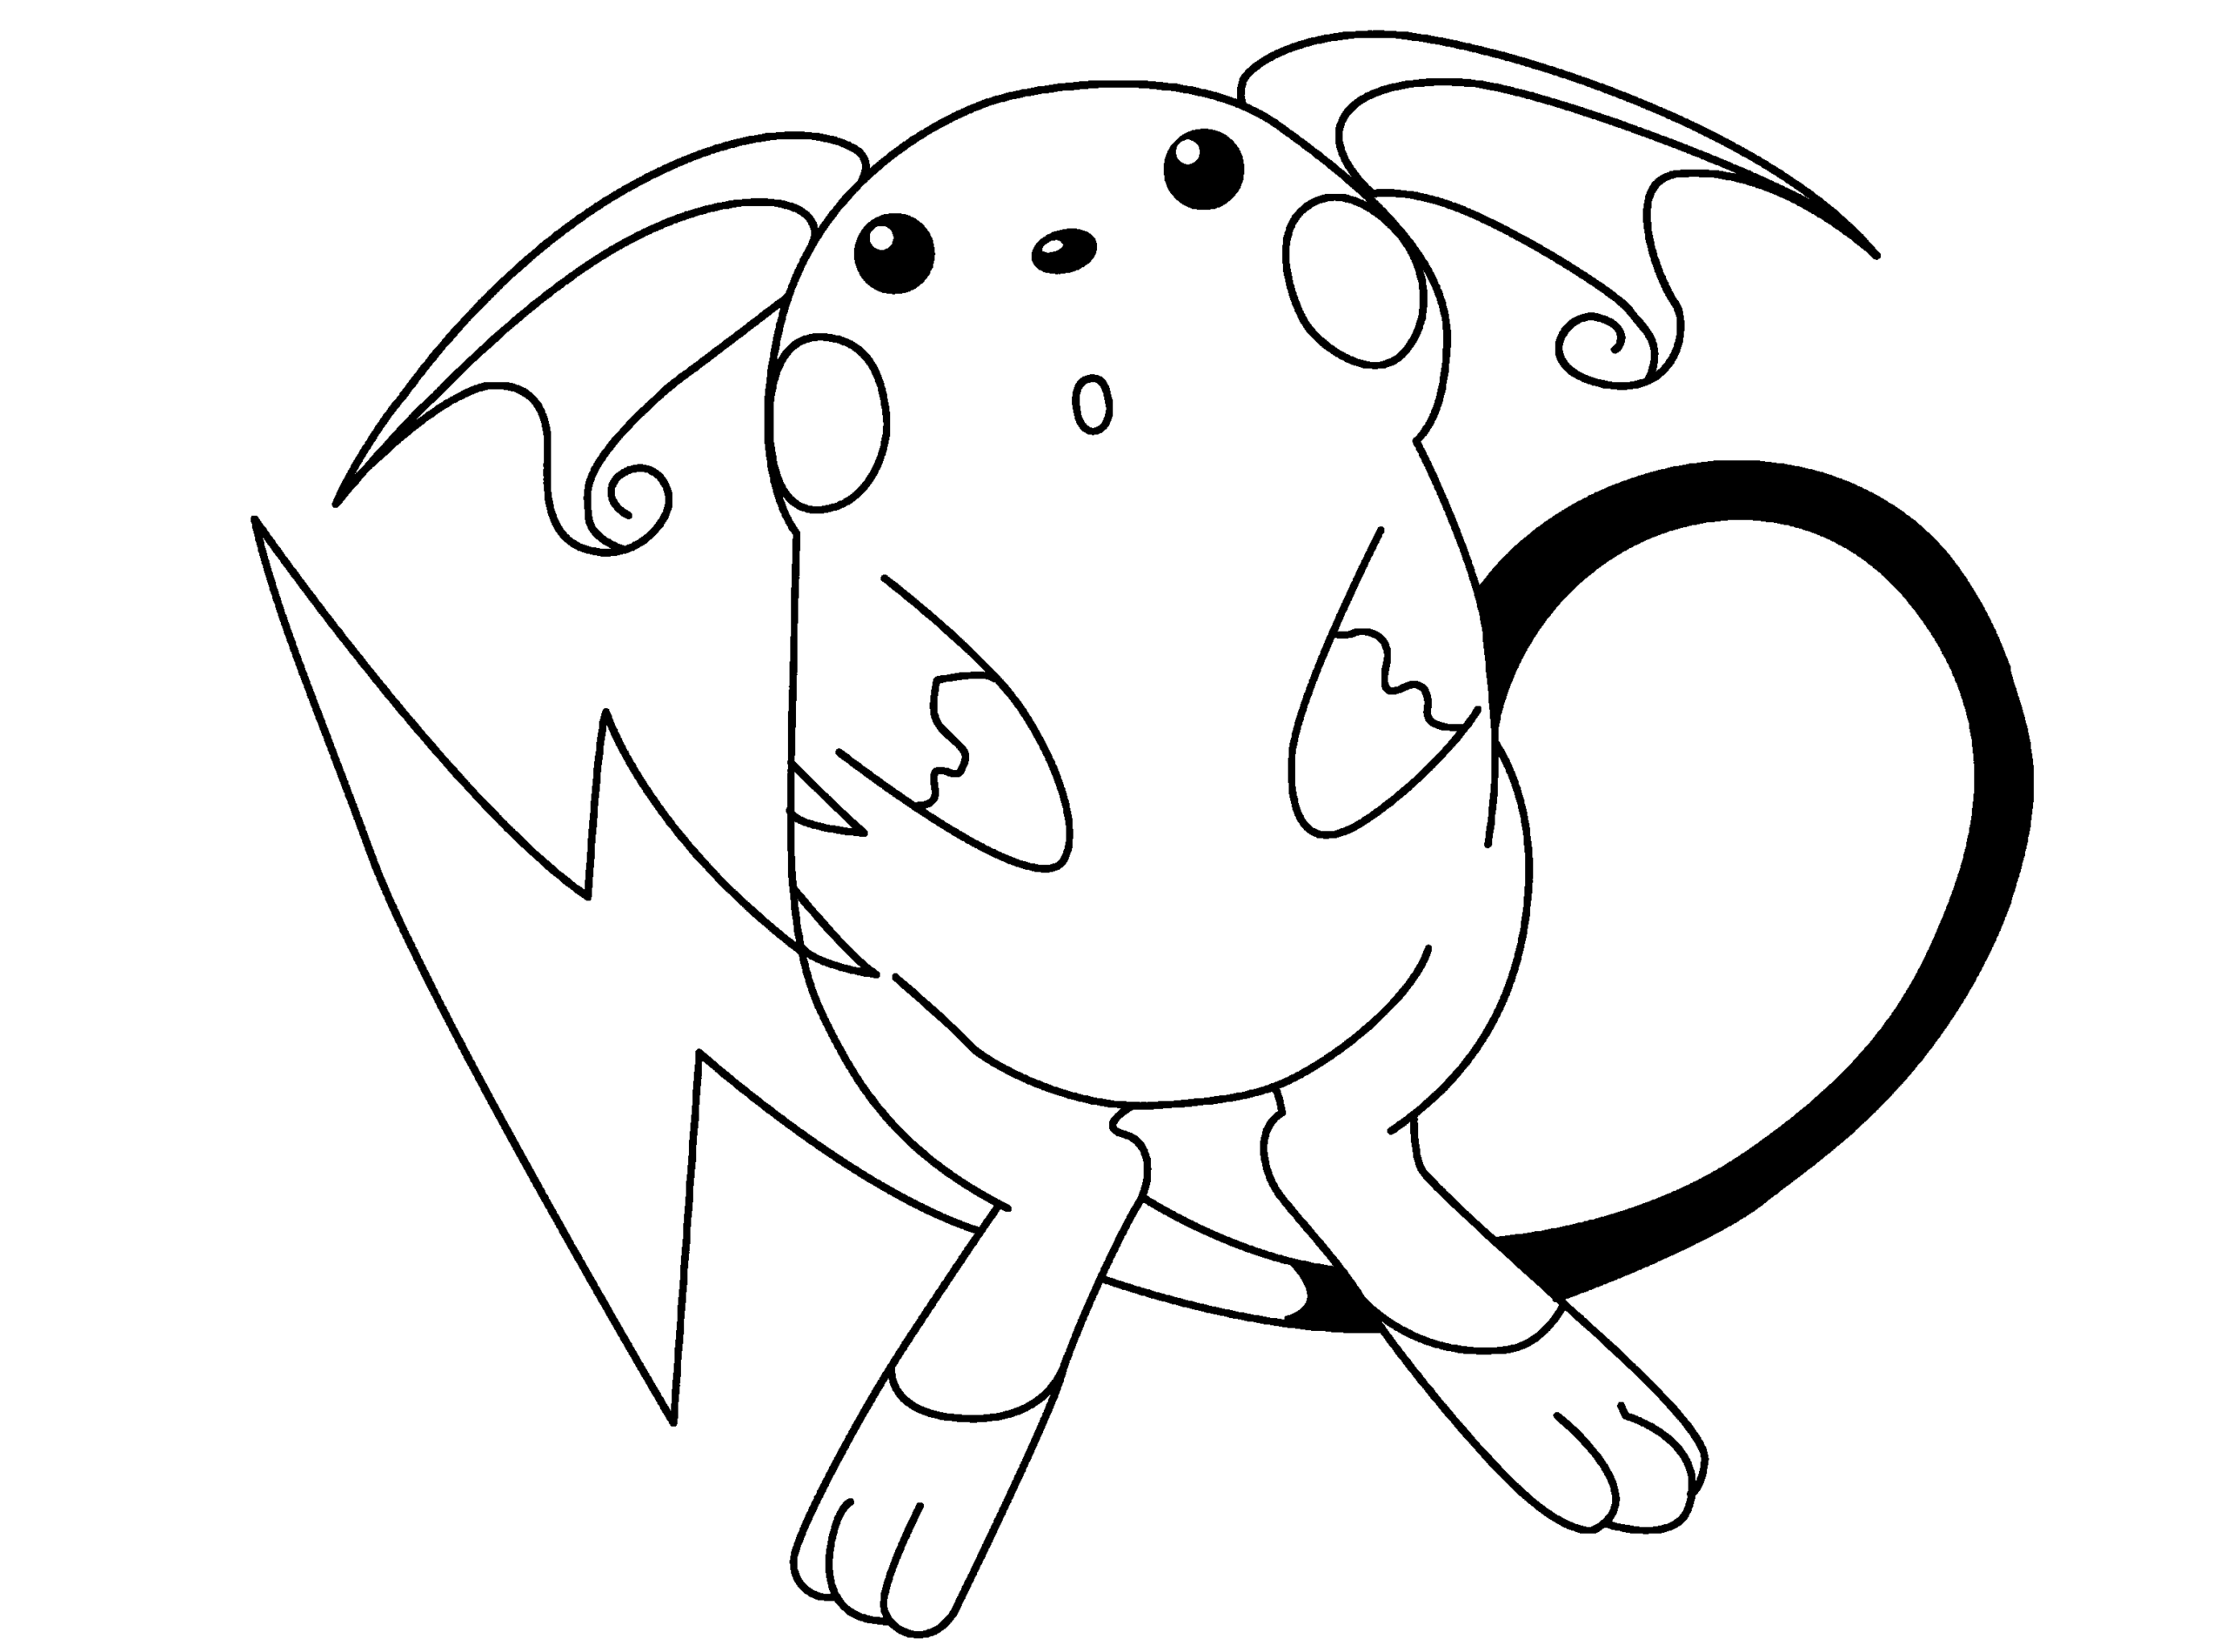 Pikachu Printable Coloring Pages Anime Pikachu Sheet 2021 0954 Coloring4free